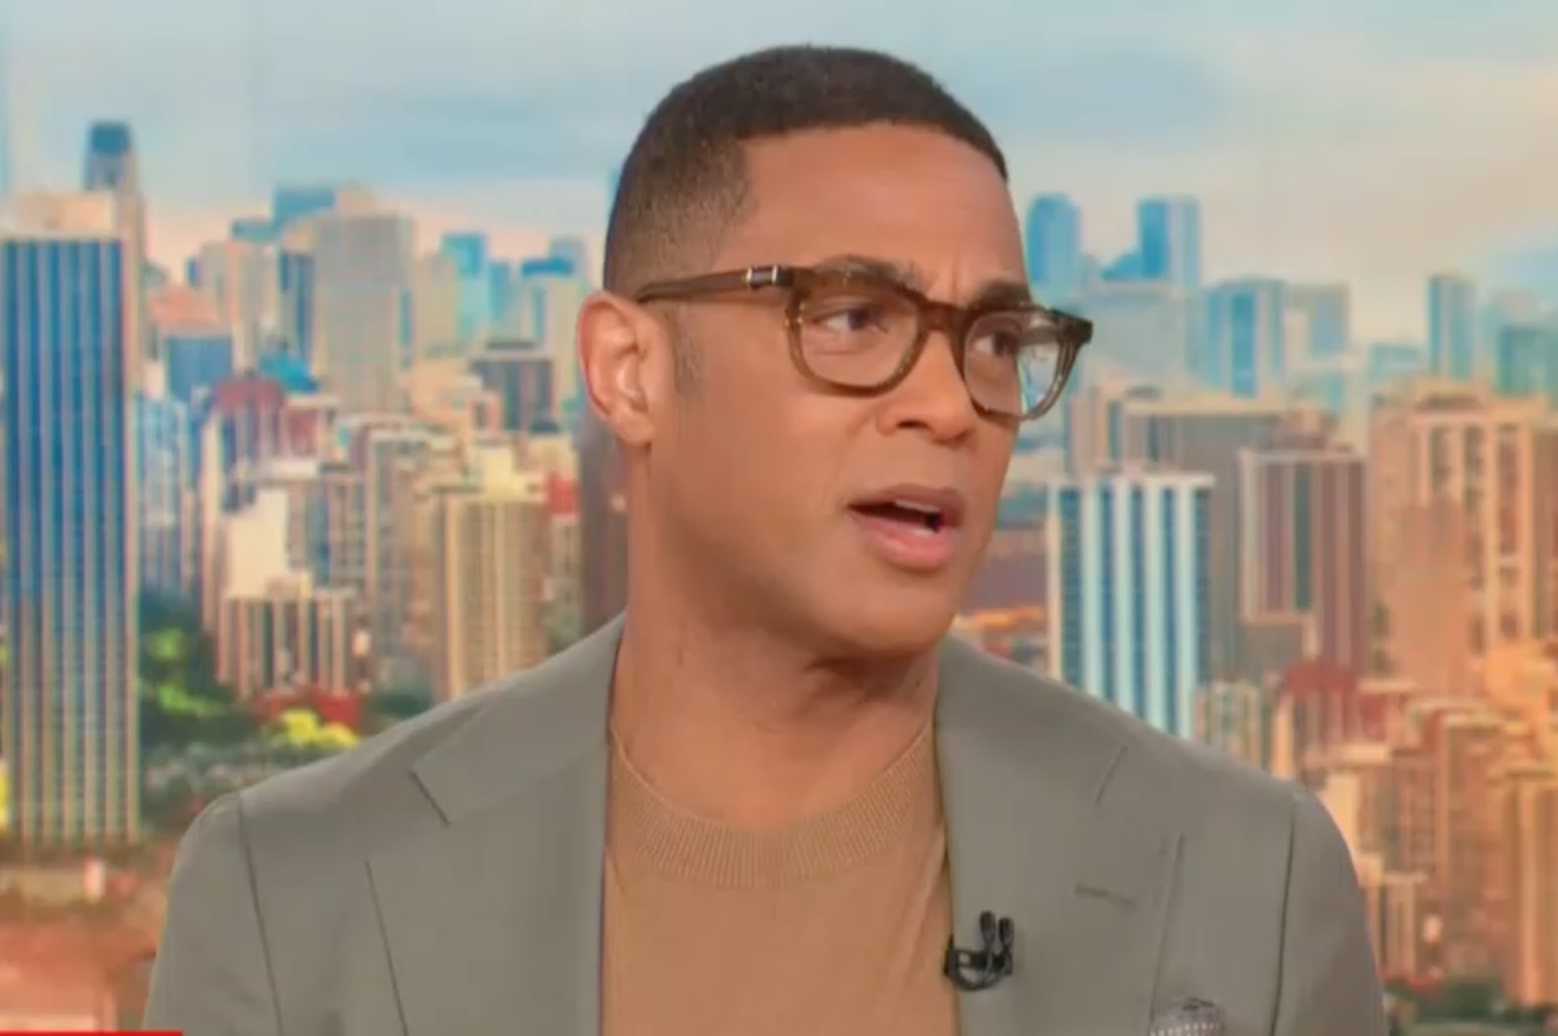 Don Lemon to Receive ‘Formal Training’ After Comment About Women in Their ‘Prime,’ Says CNN Boss Chris Licht